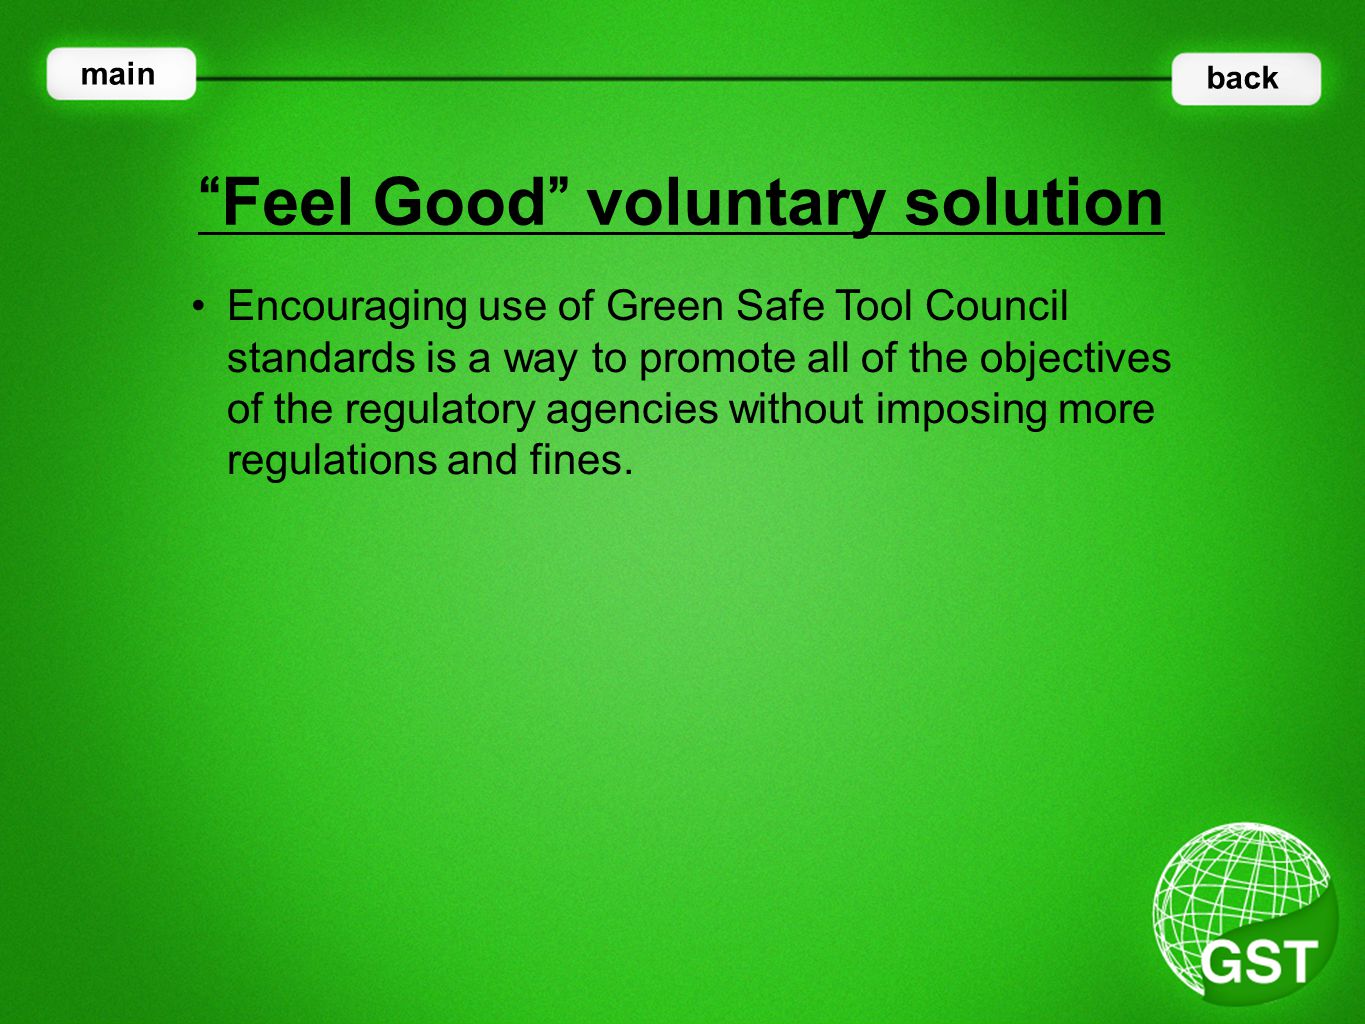 Encouraging use of Green Safe Tool Council standards is a way to promote all of the objectives of the regulatory agencies without imposing more regulations and fines.